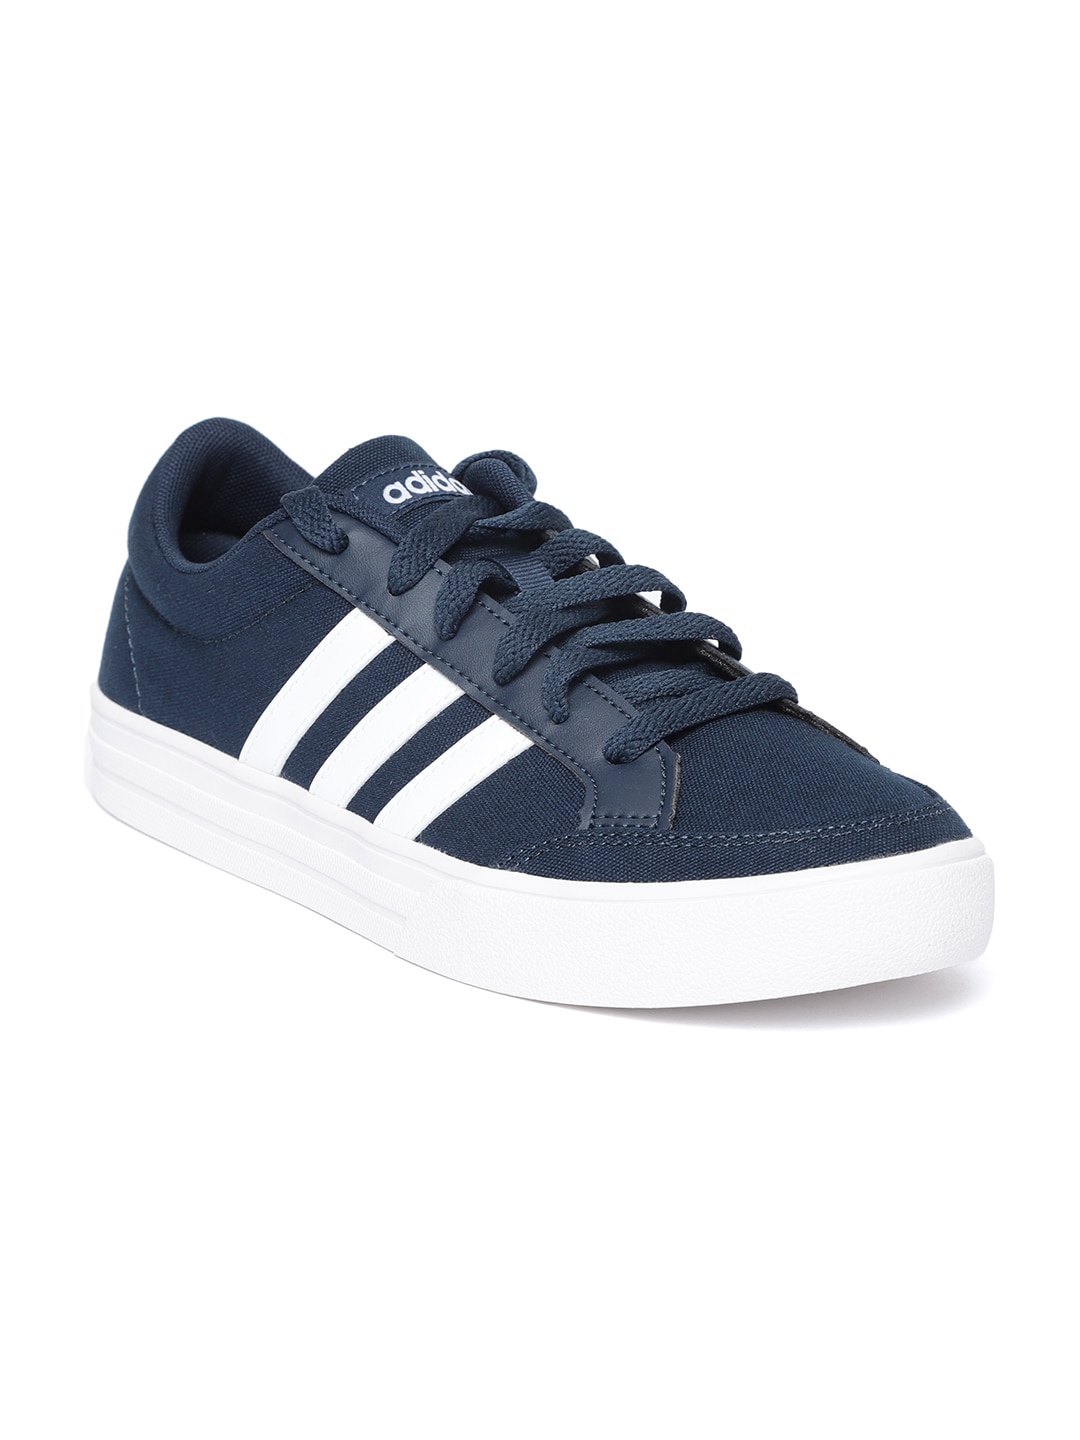 Adidas Ace Chopper Navy Blue Tennis Shoes for Men online in India at ...